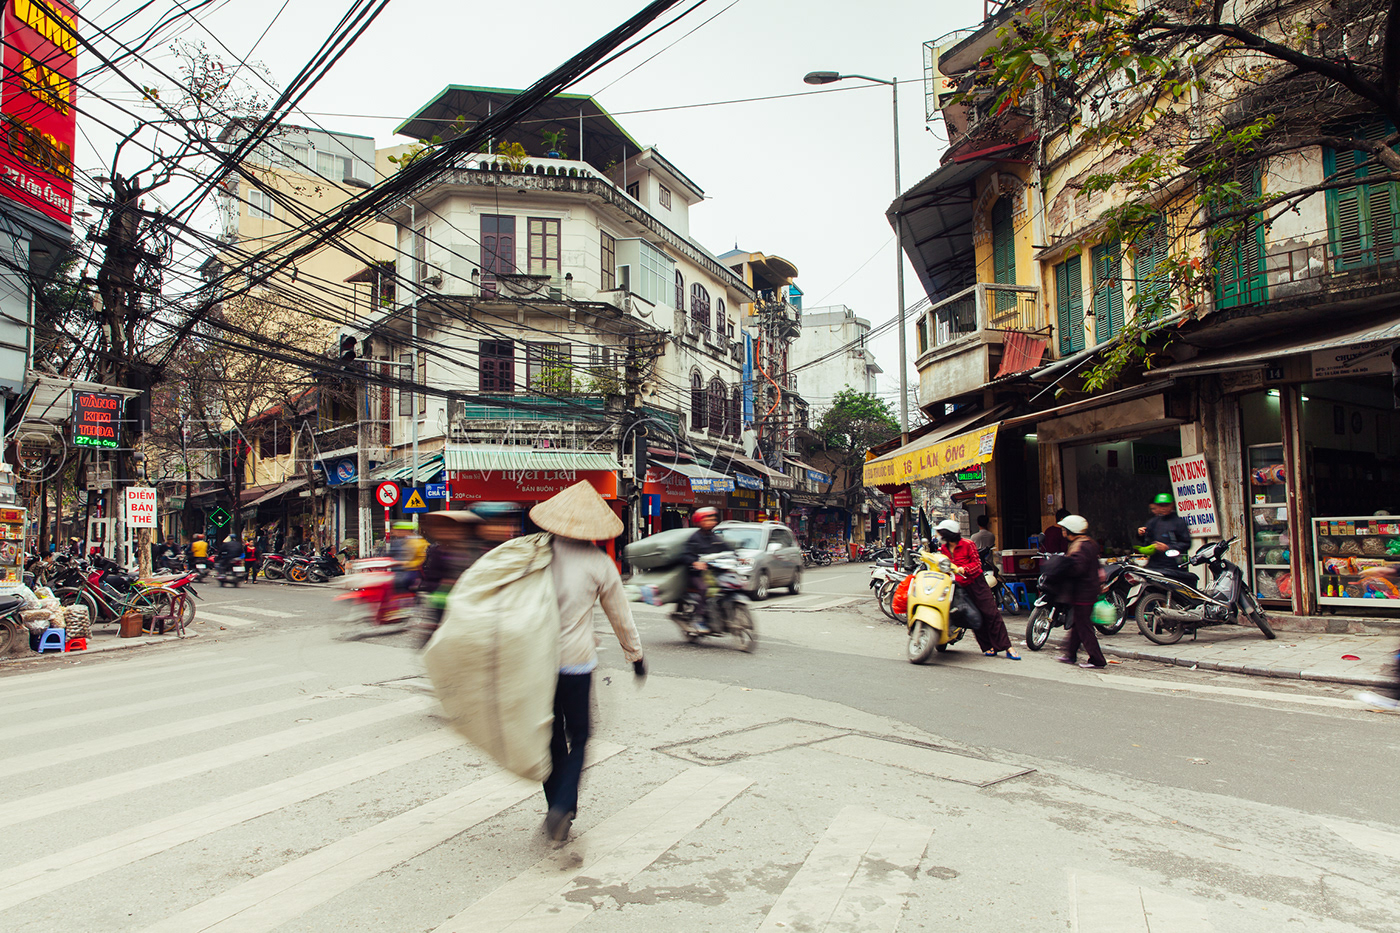 Vietnamese man carries a big bag across the busy road in the Old Quarter, Hanoi, Vietnam